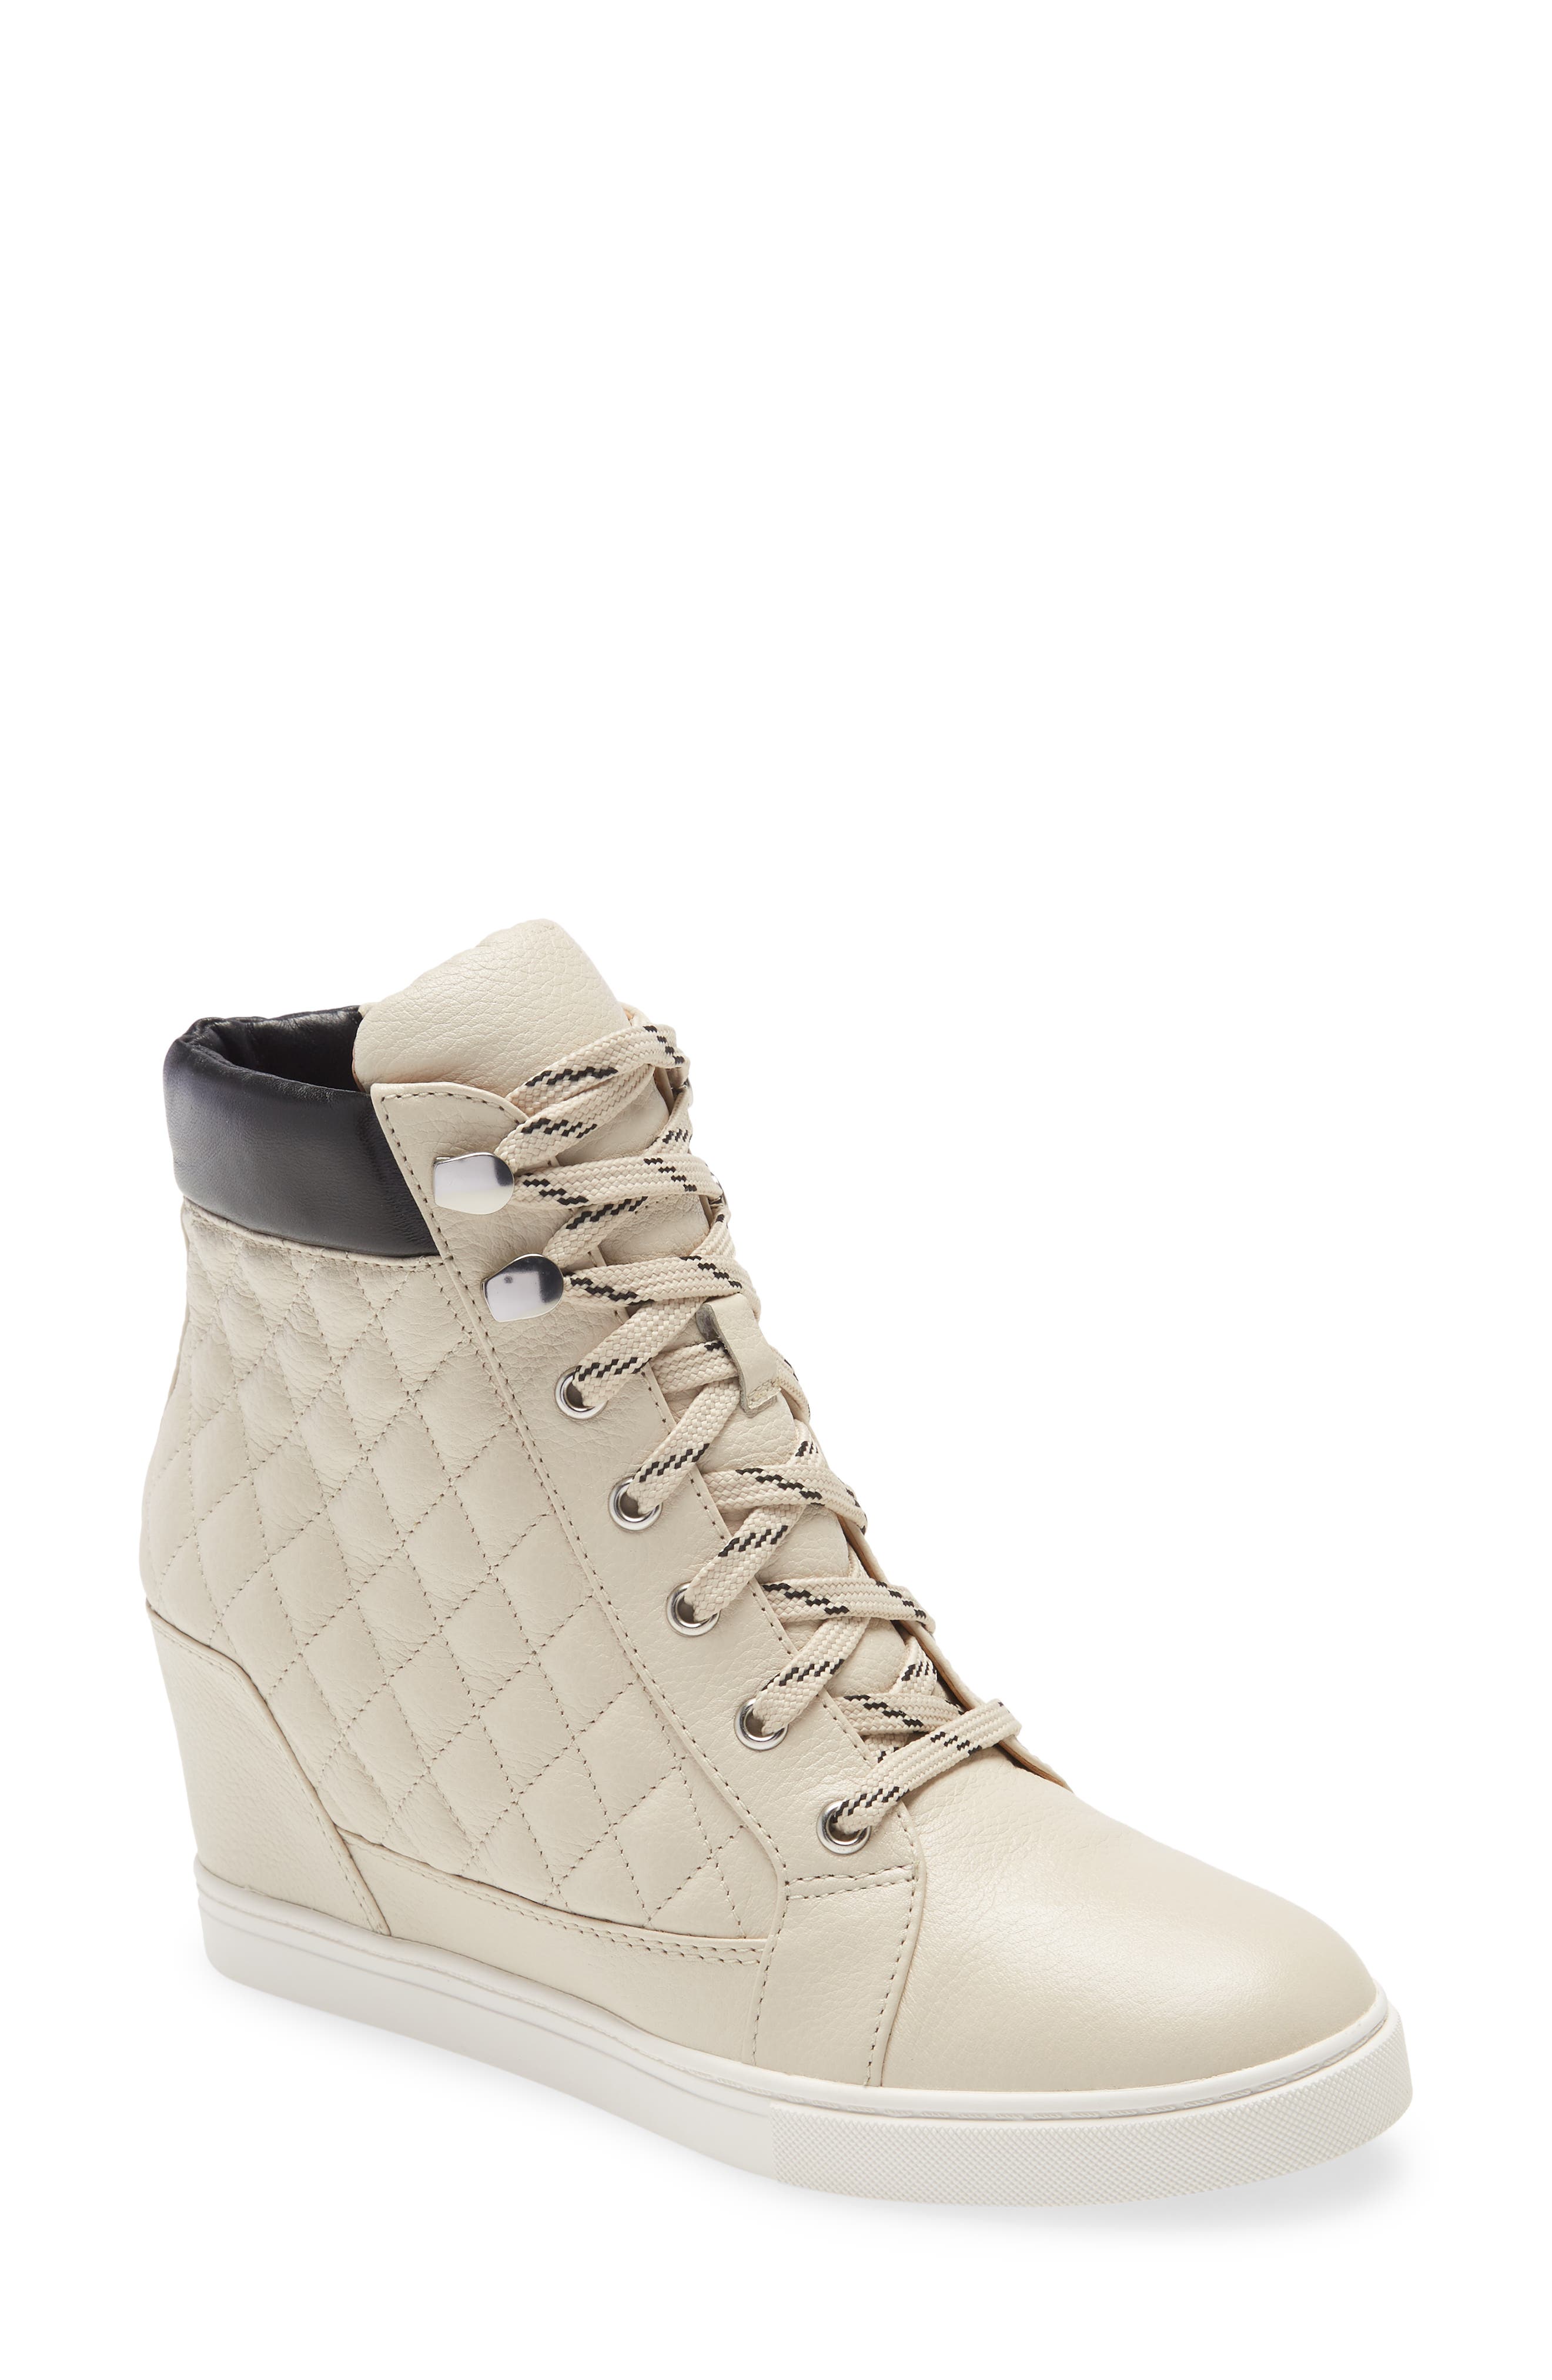 wedge tennis shoes nordstrom